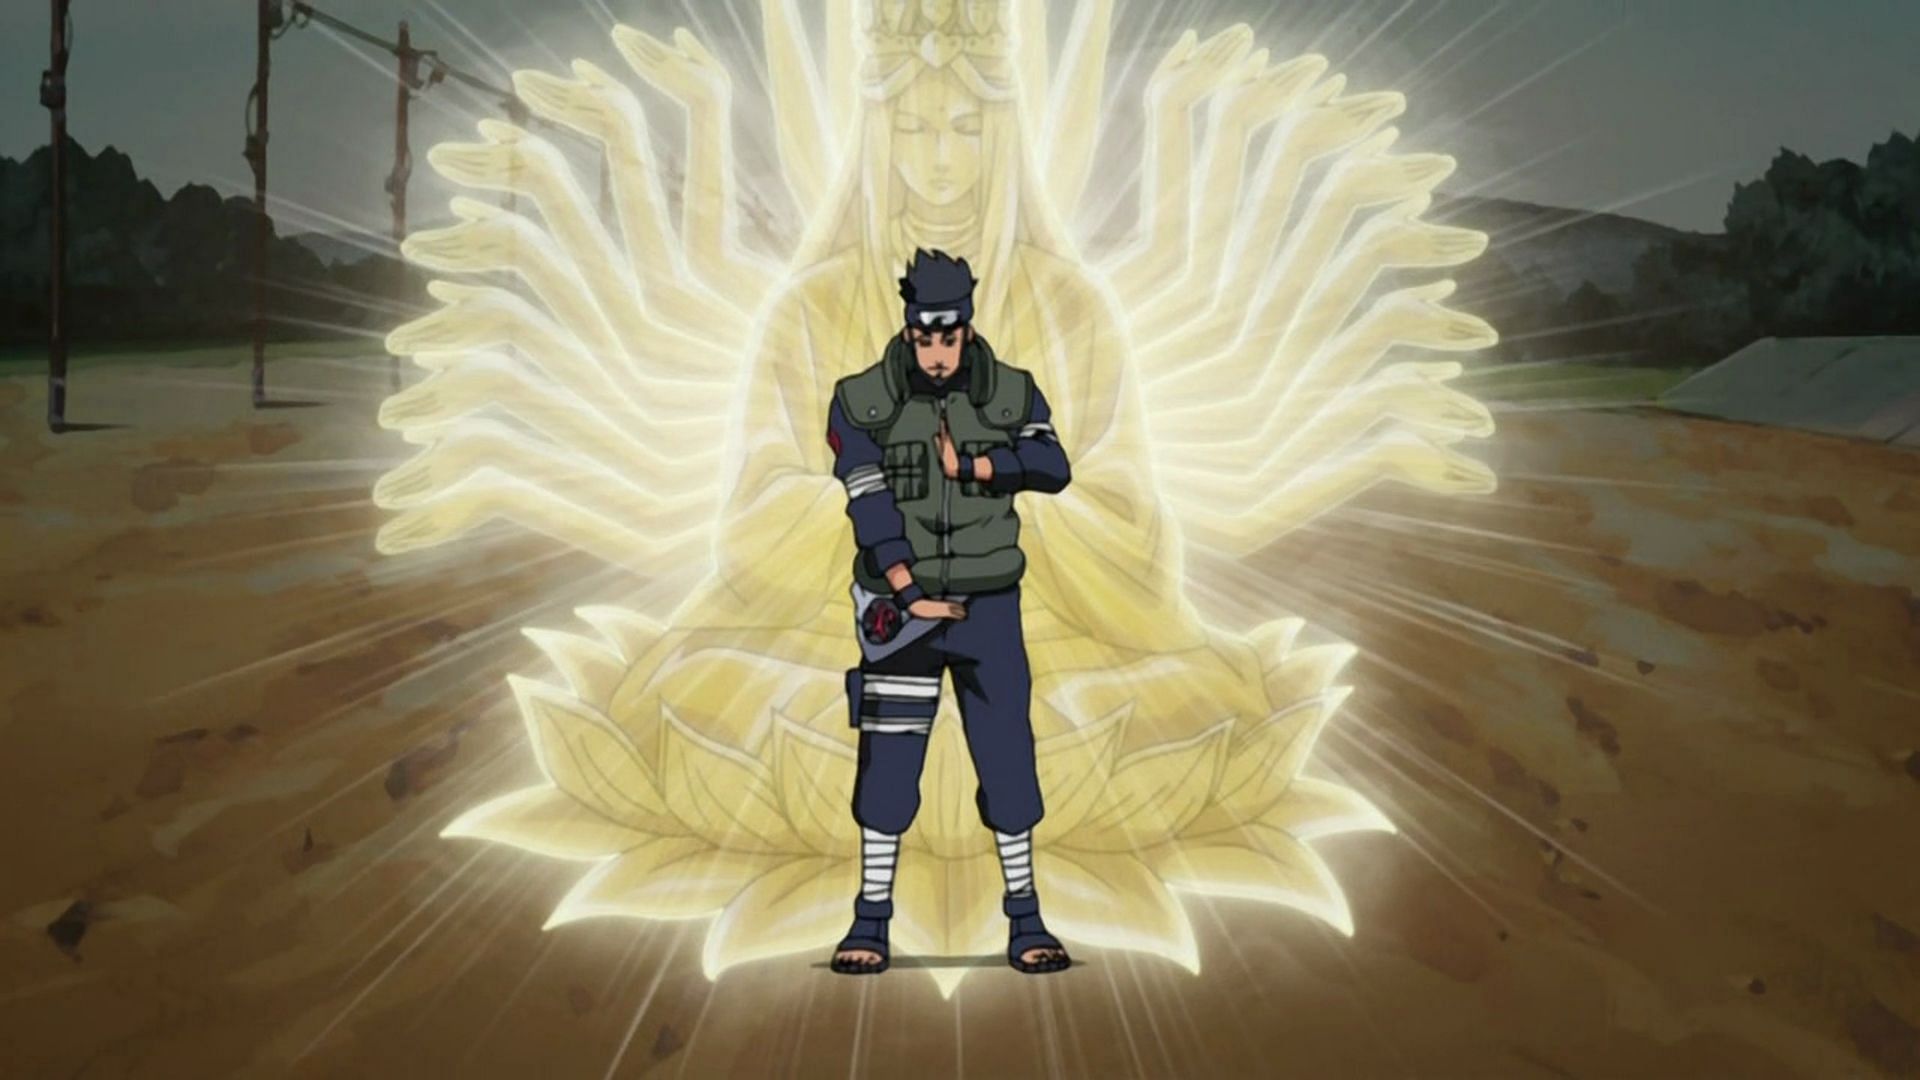 Asuma seen mid-fight in the anime series (Image via Pierrot)